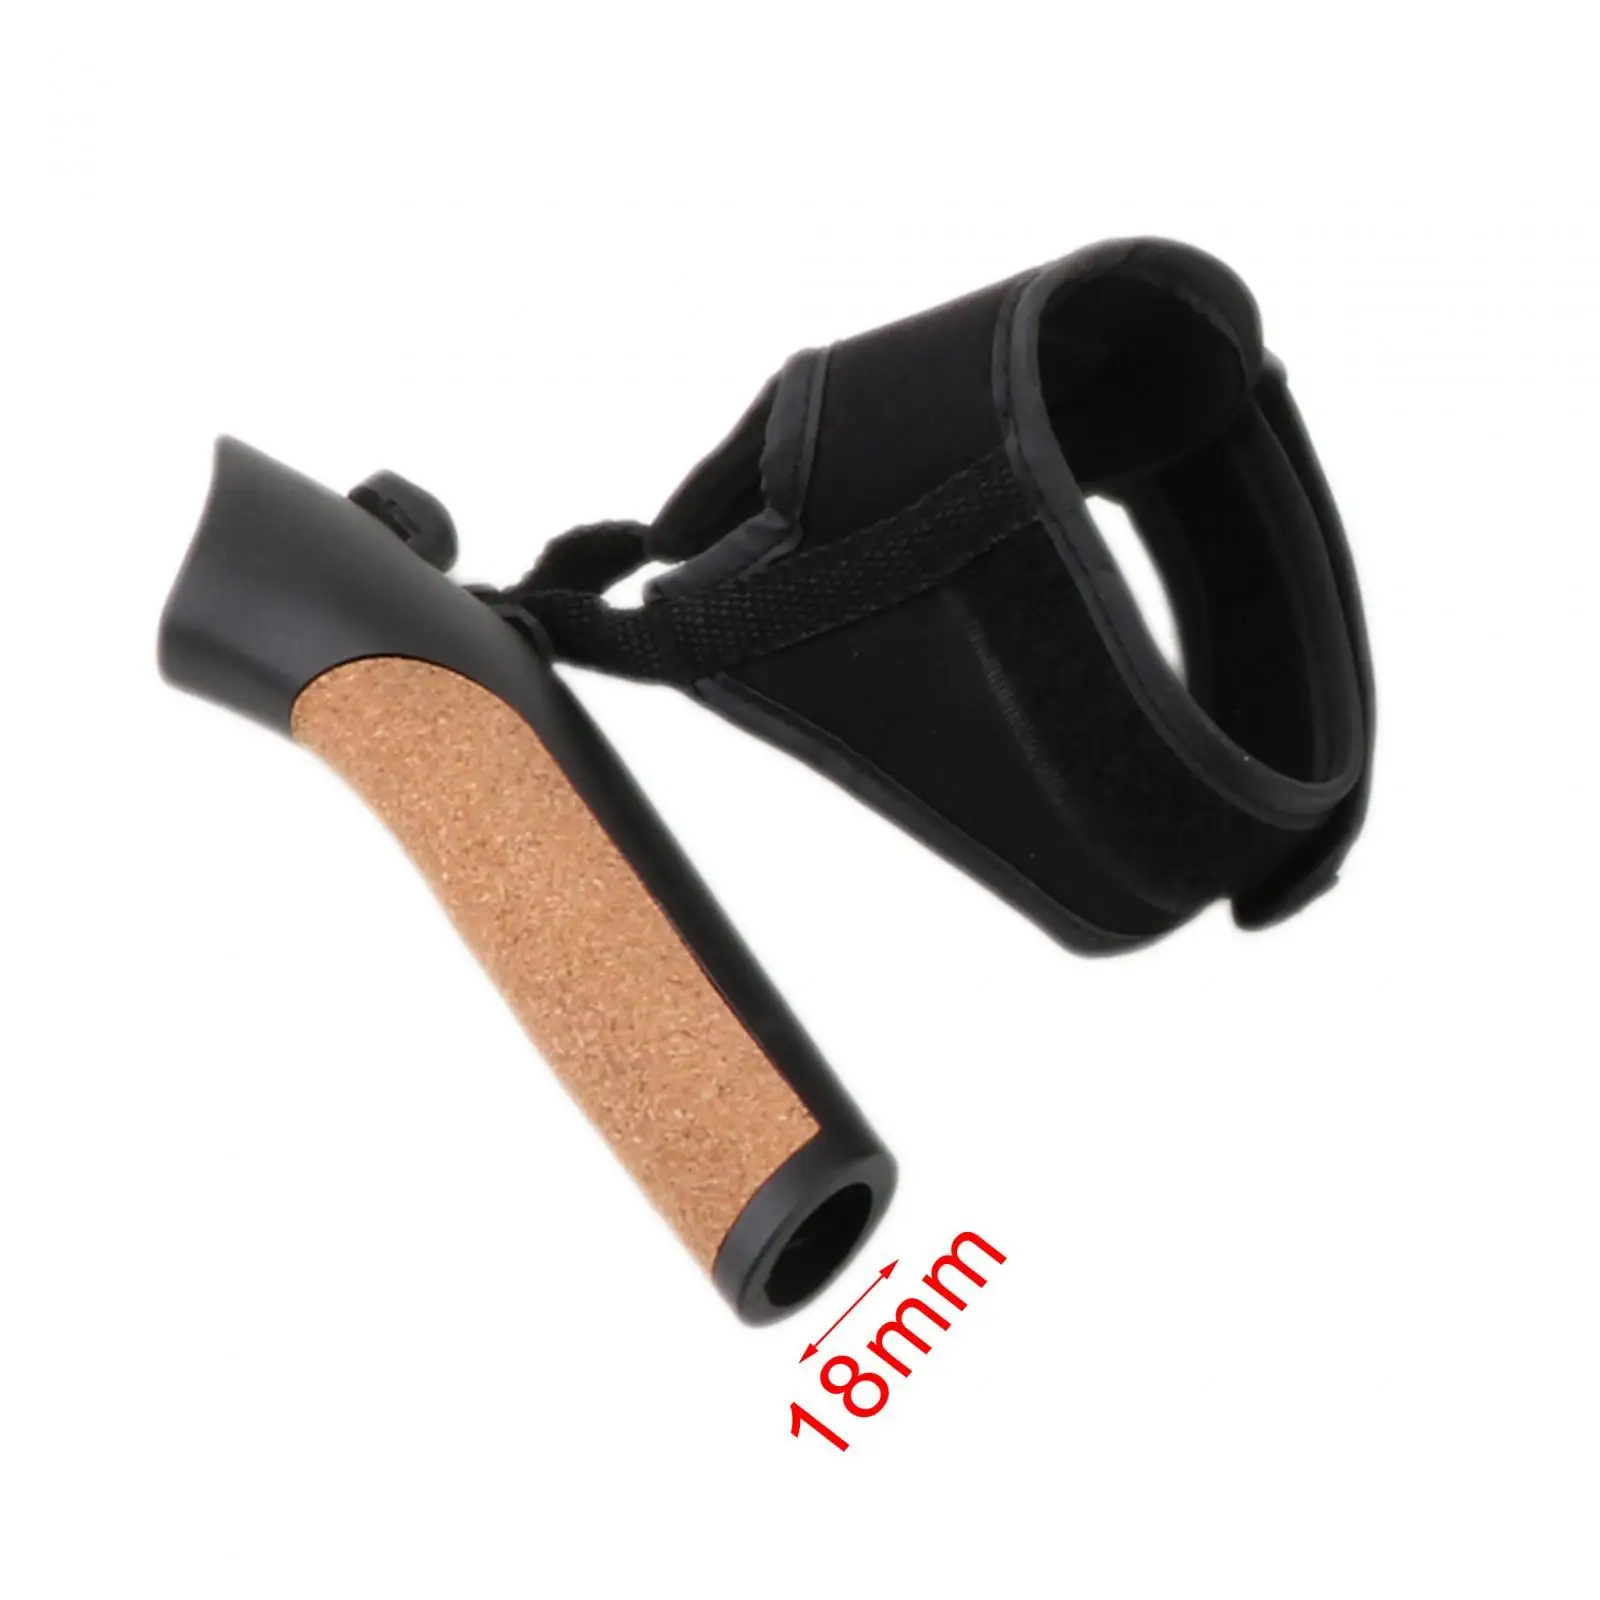 Alpenstock Handle Grip Durable for Mountaineering Outdoor Photography Hiking